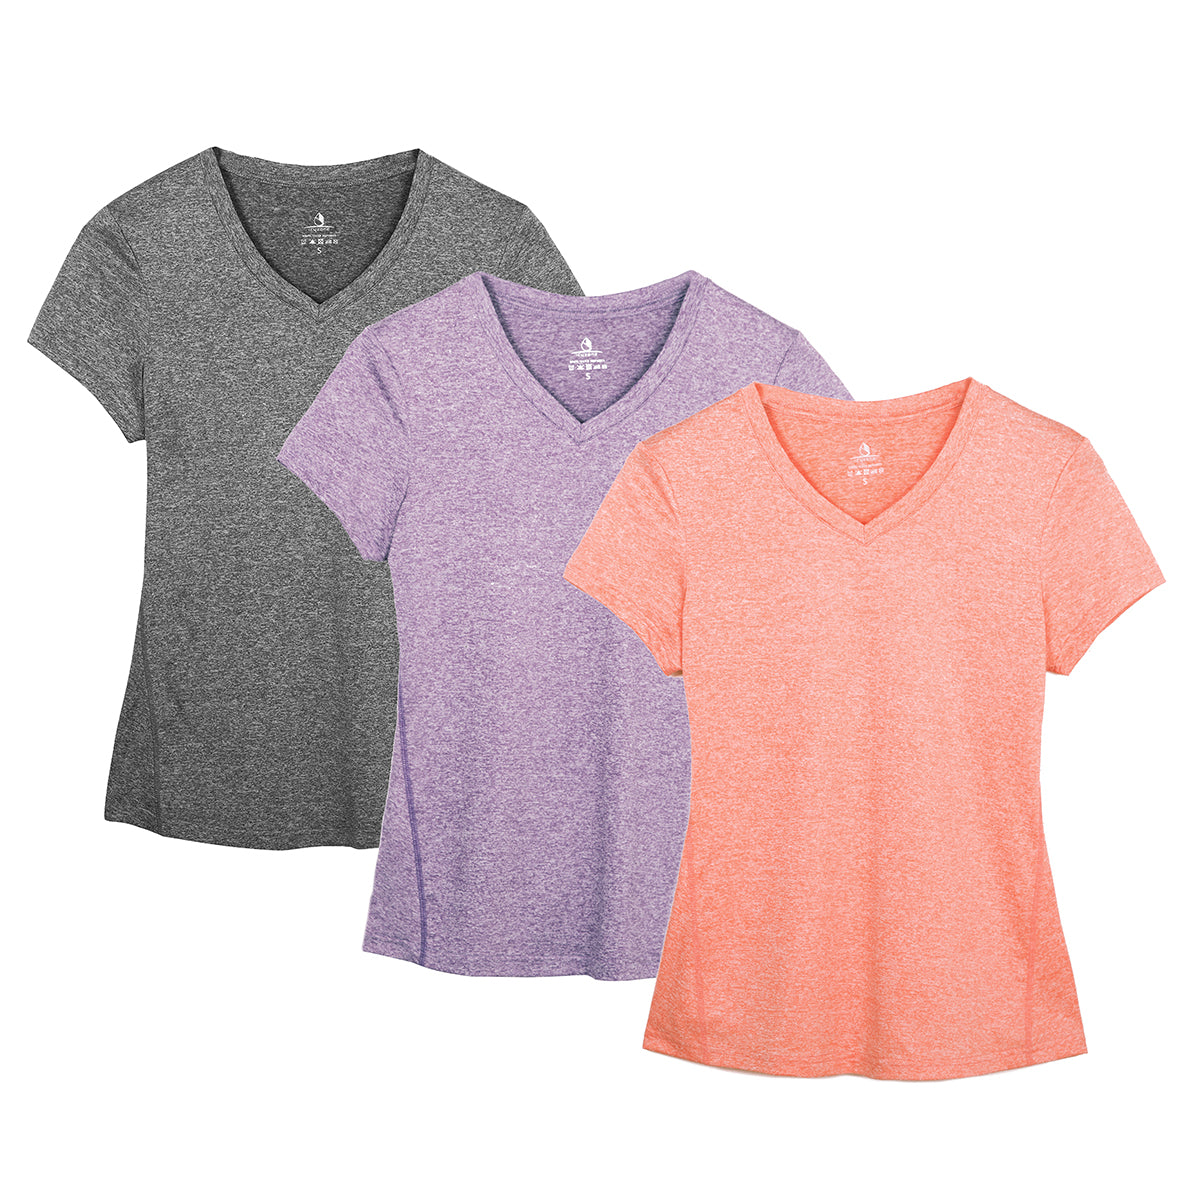 V Neck T-Shirt for Women Athletic Active Yoga Womens Workout Gym Tops 5  Pack Small, Set B